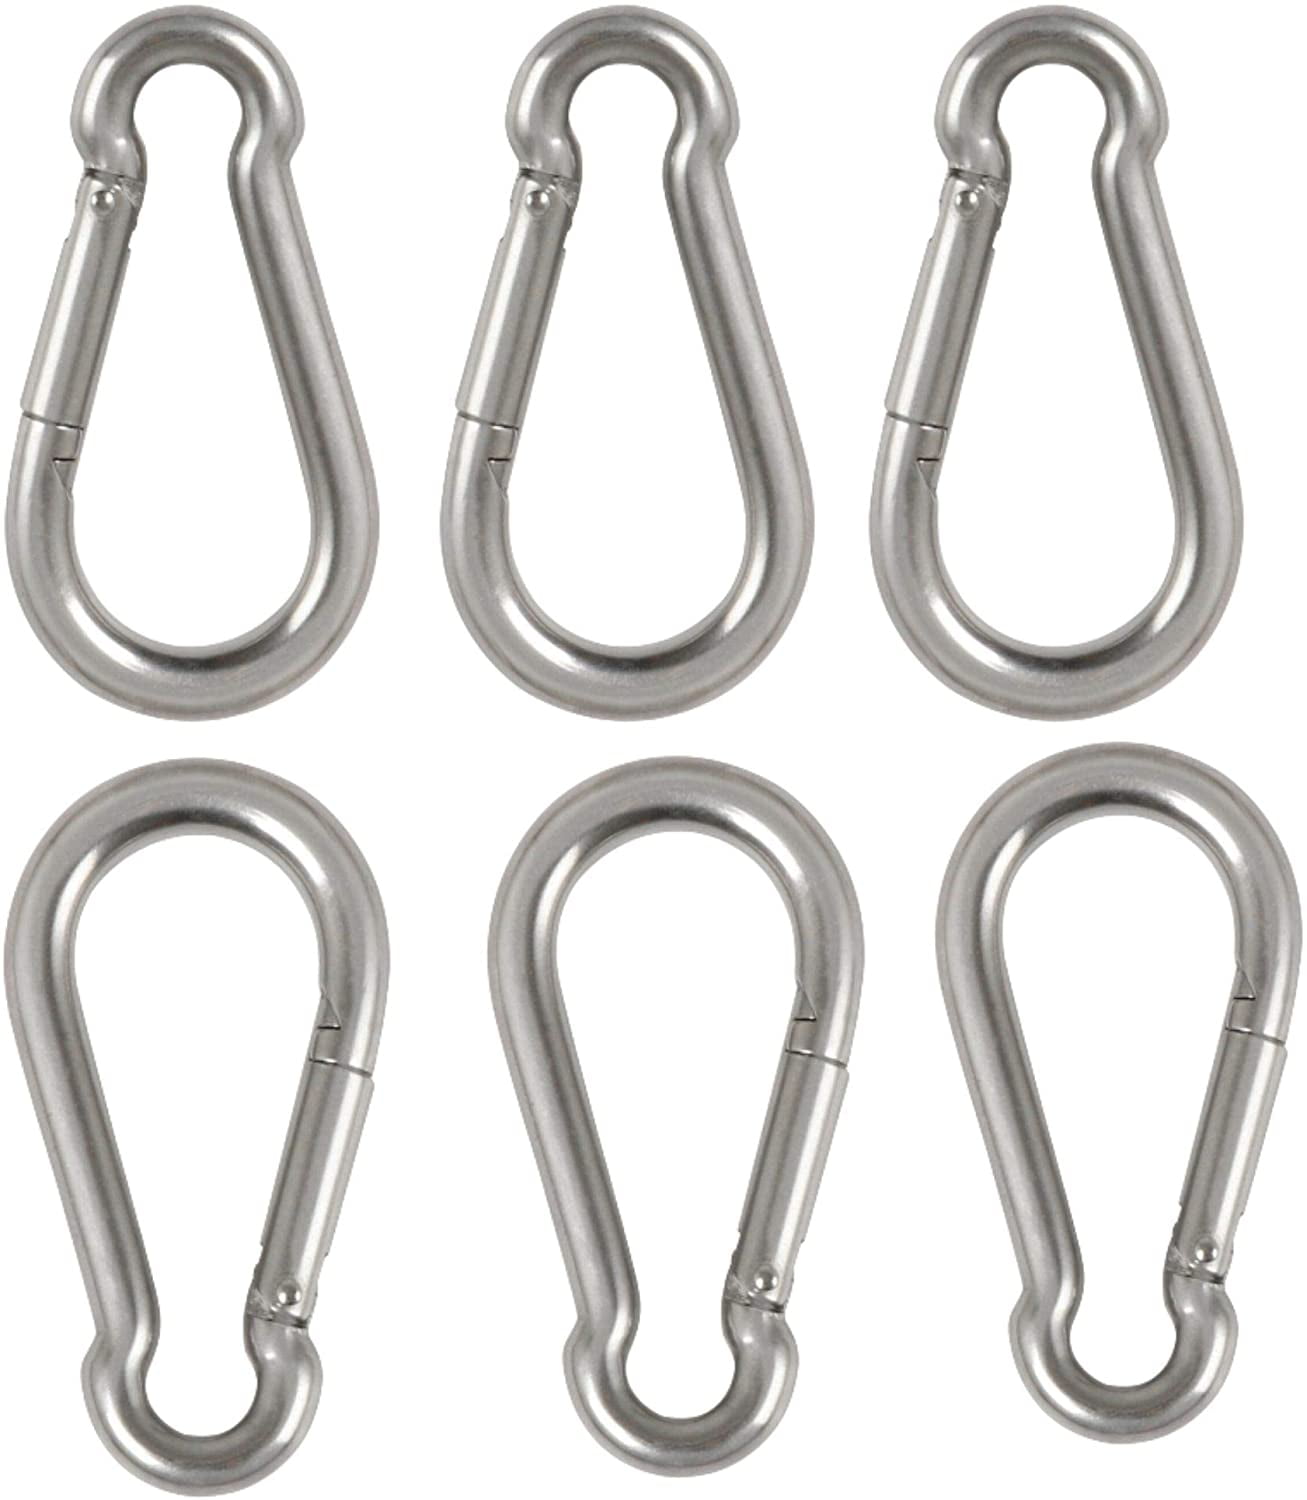 10 Pack Stainless Steel Quick Release Safety Oval Straight Snap Hook Carabiners 